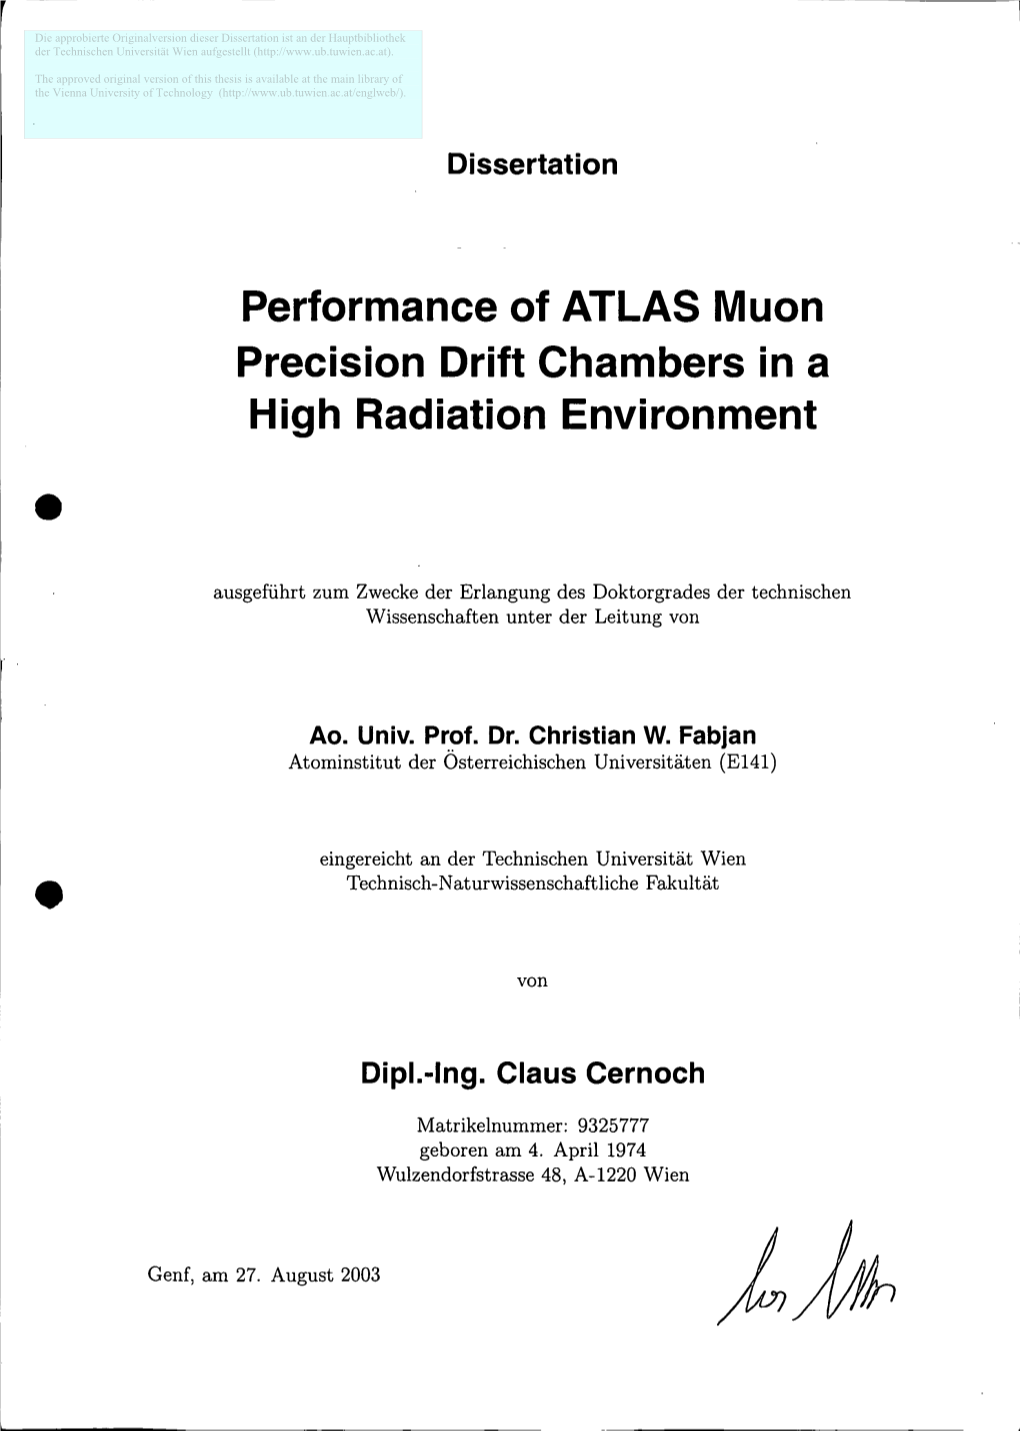 Performance of ATLAS Muon Precision Drift Chambers in a High Radiation Environment